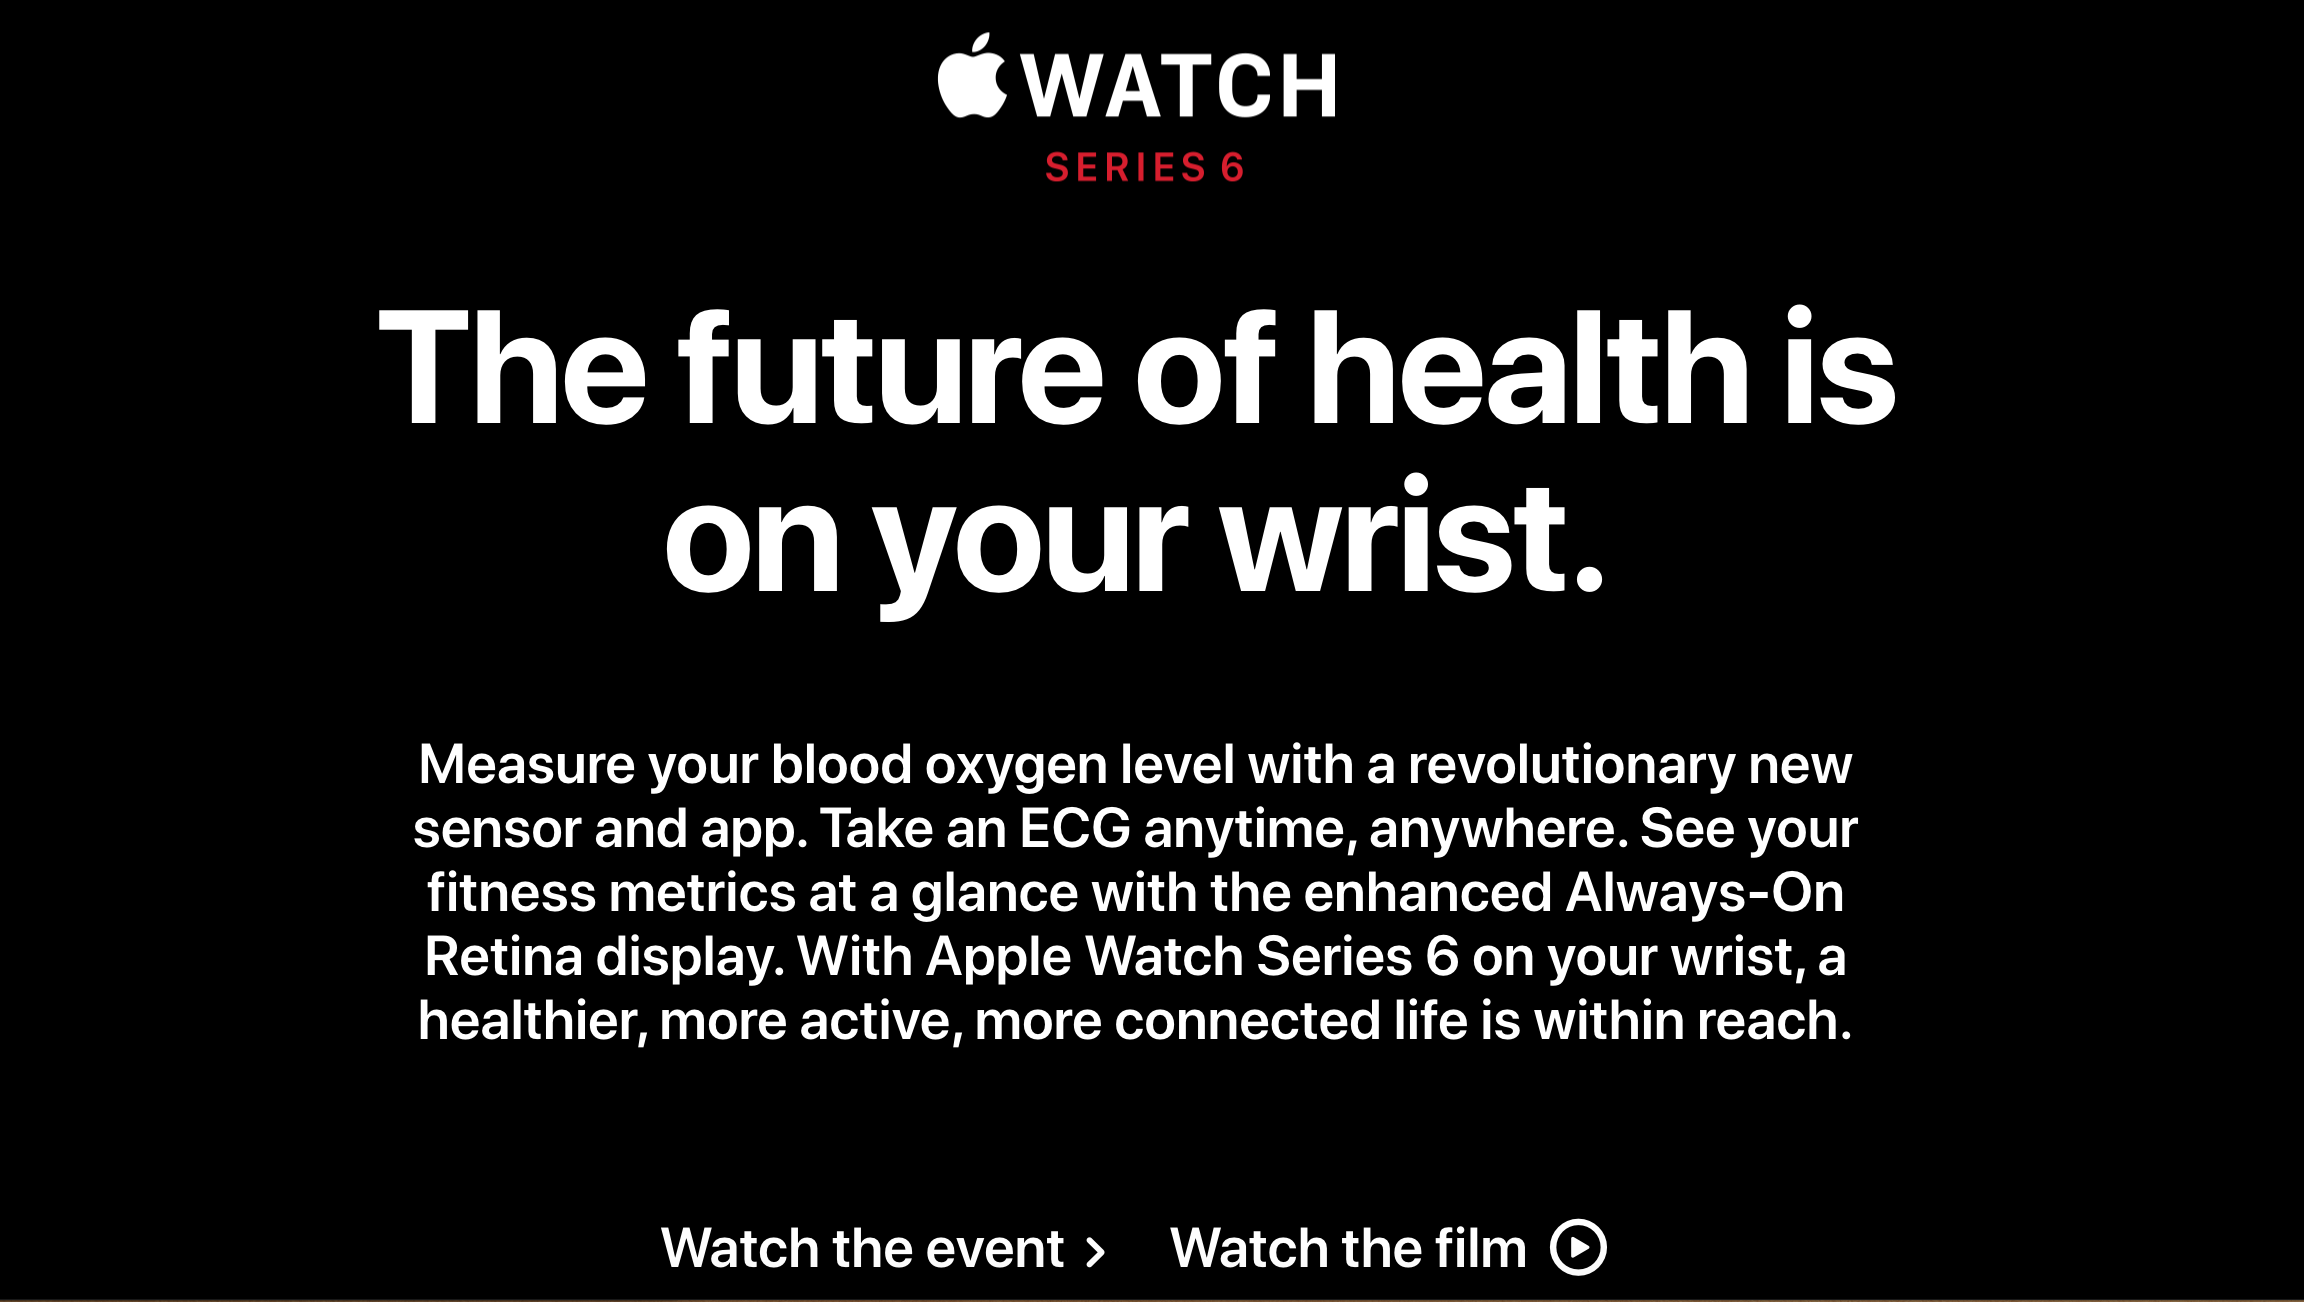 apple watch product launch